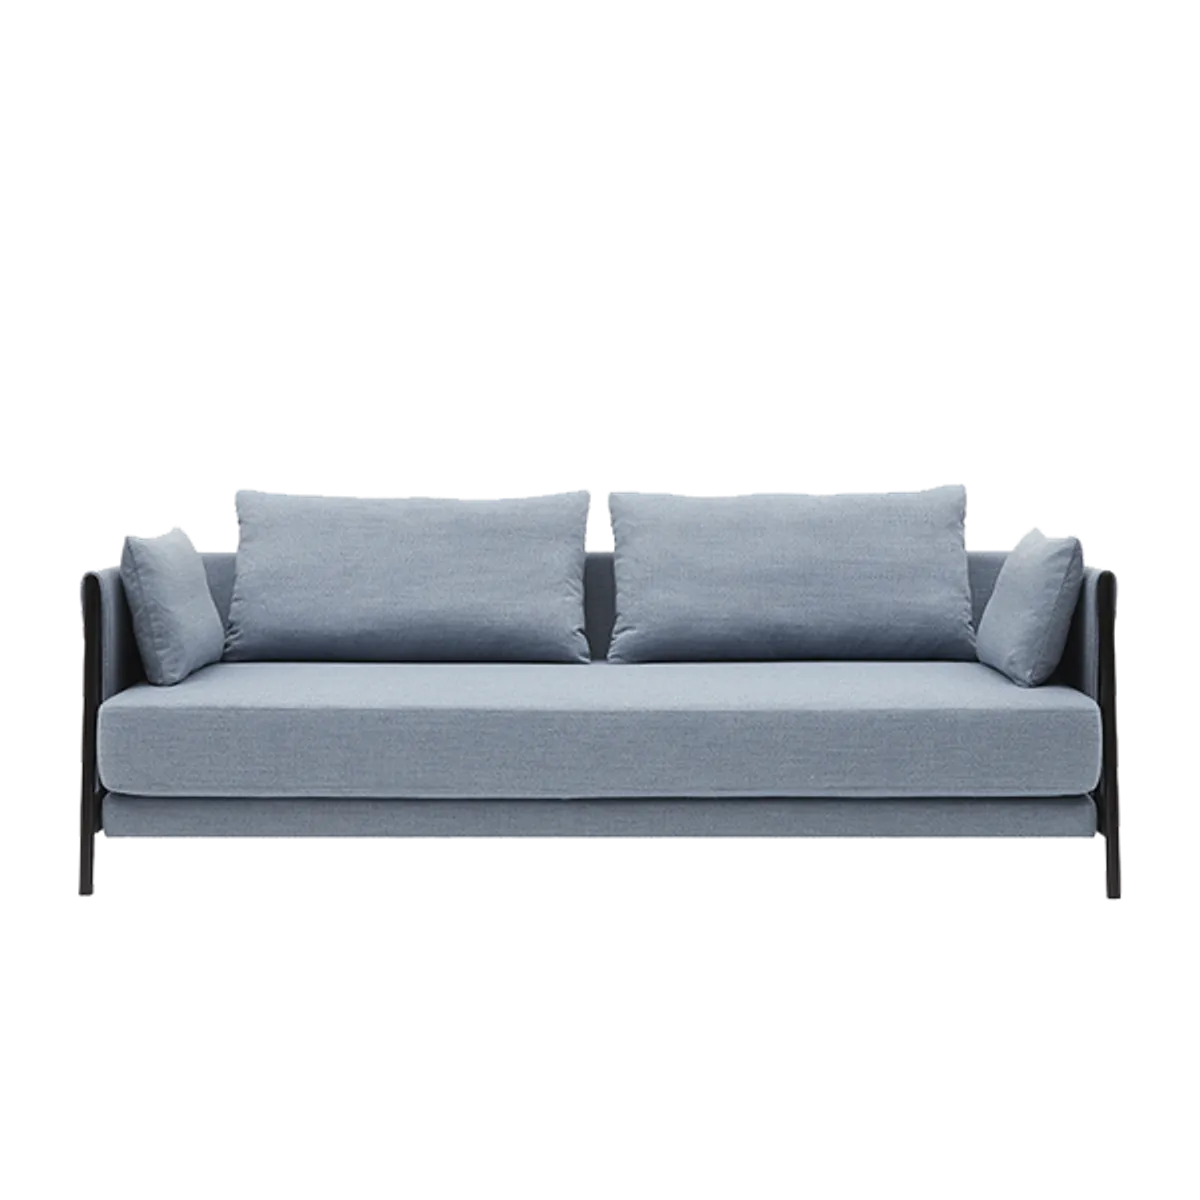 Web Romy Sofabed Front